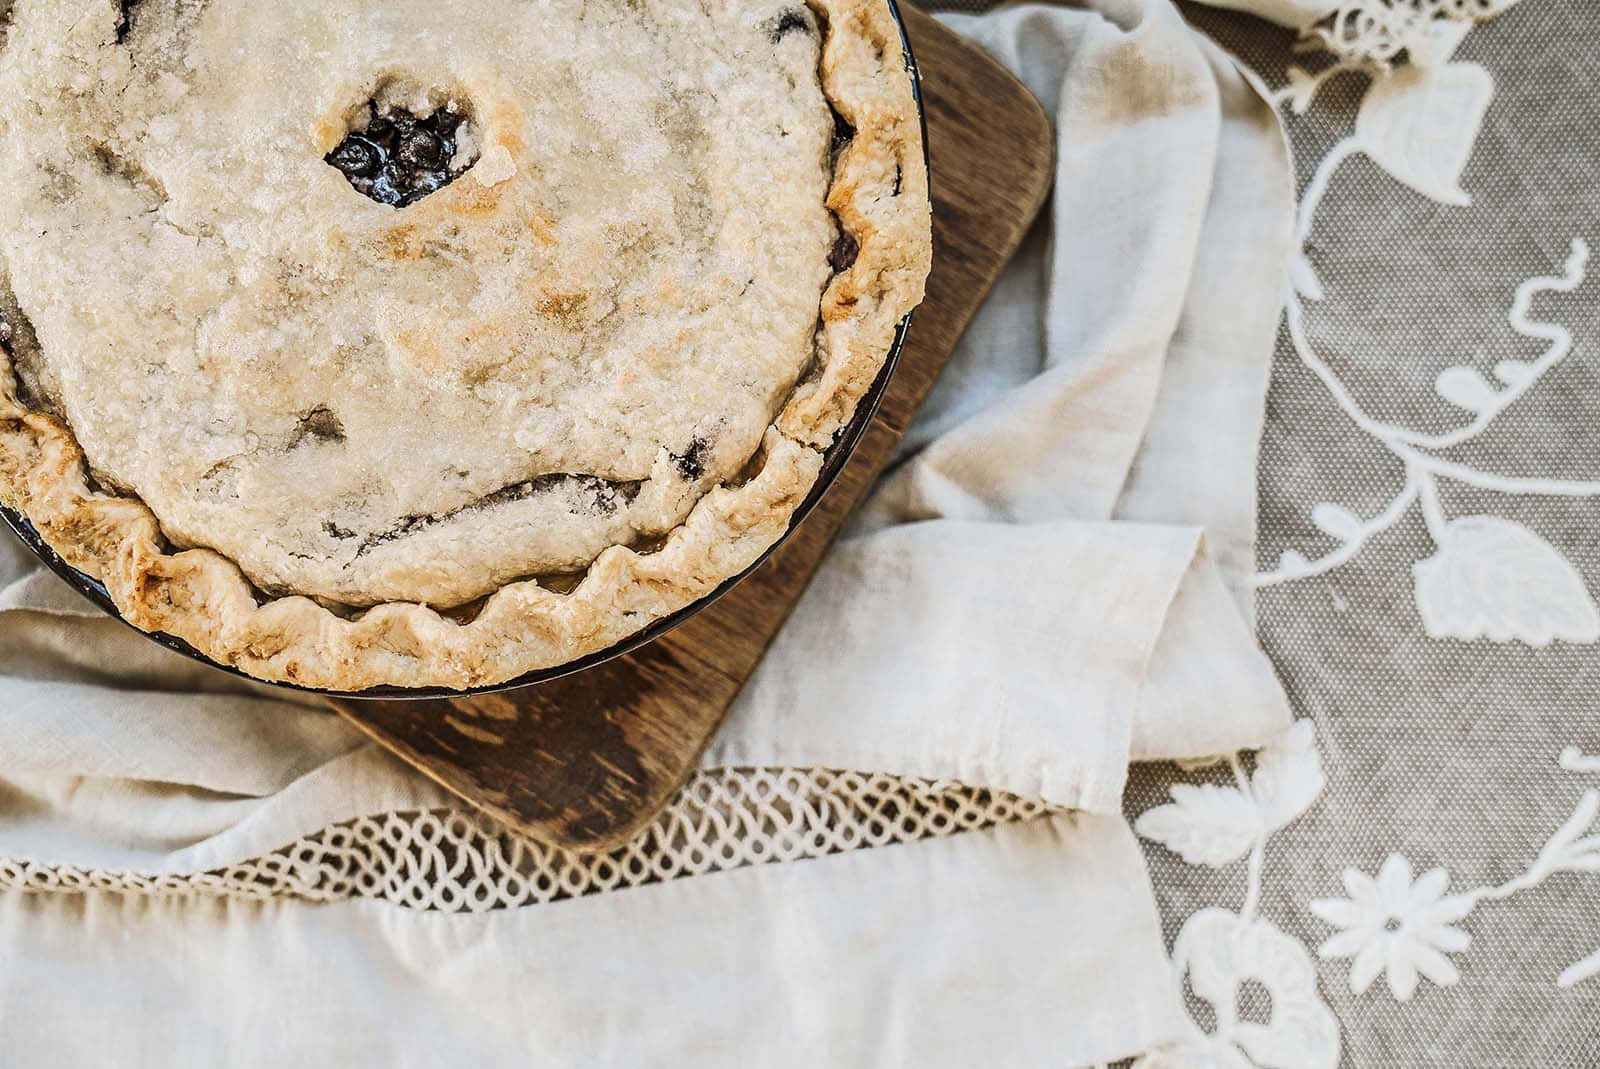 A Pie On A Wooden Board With A Doily